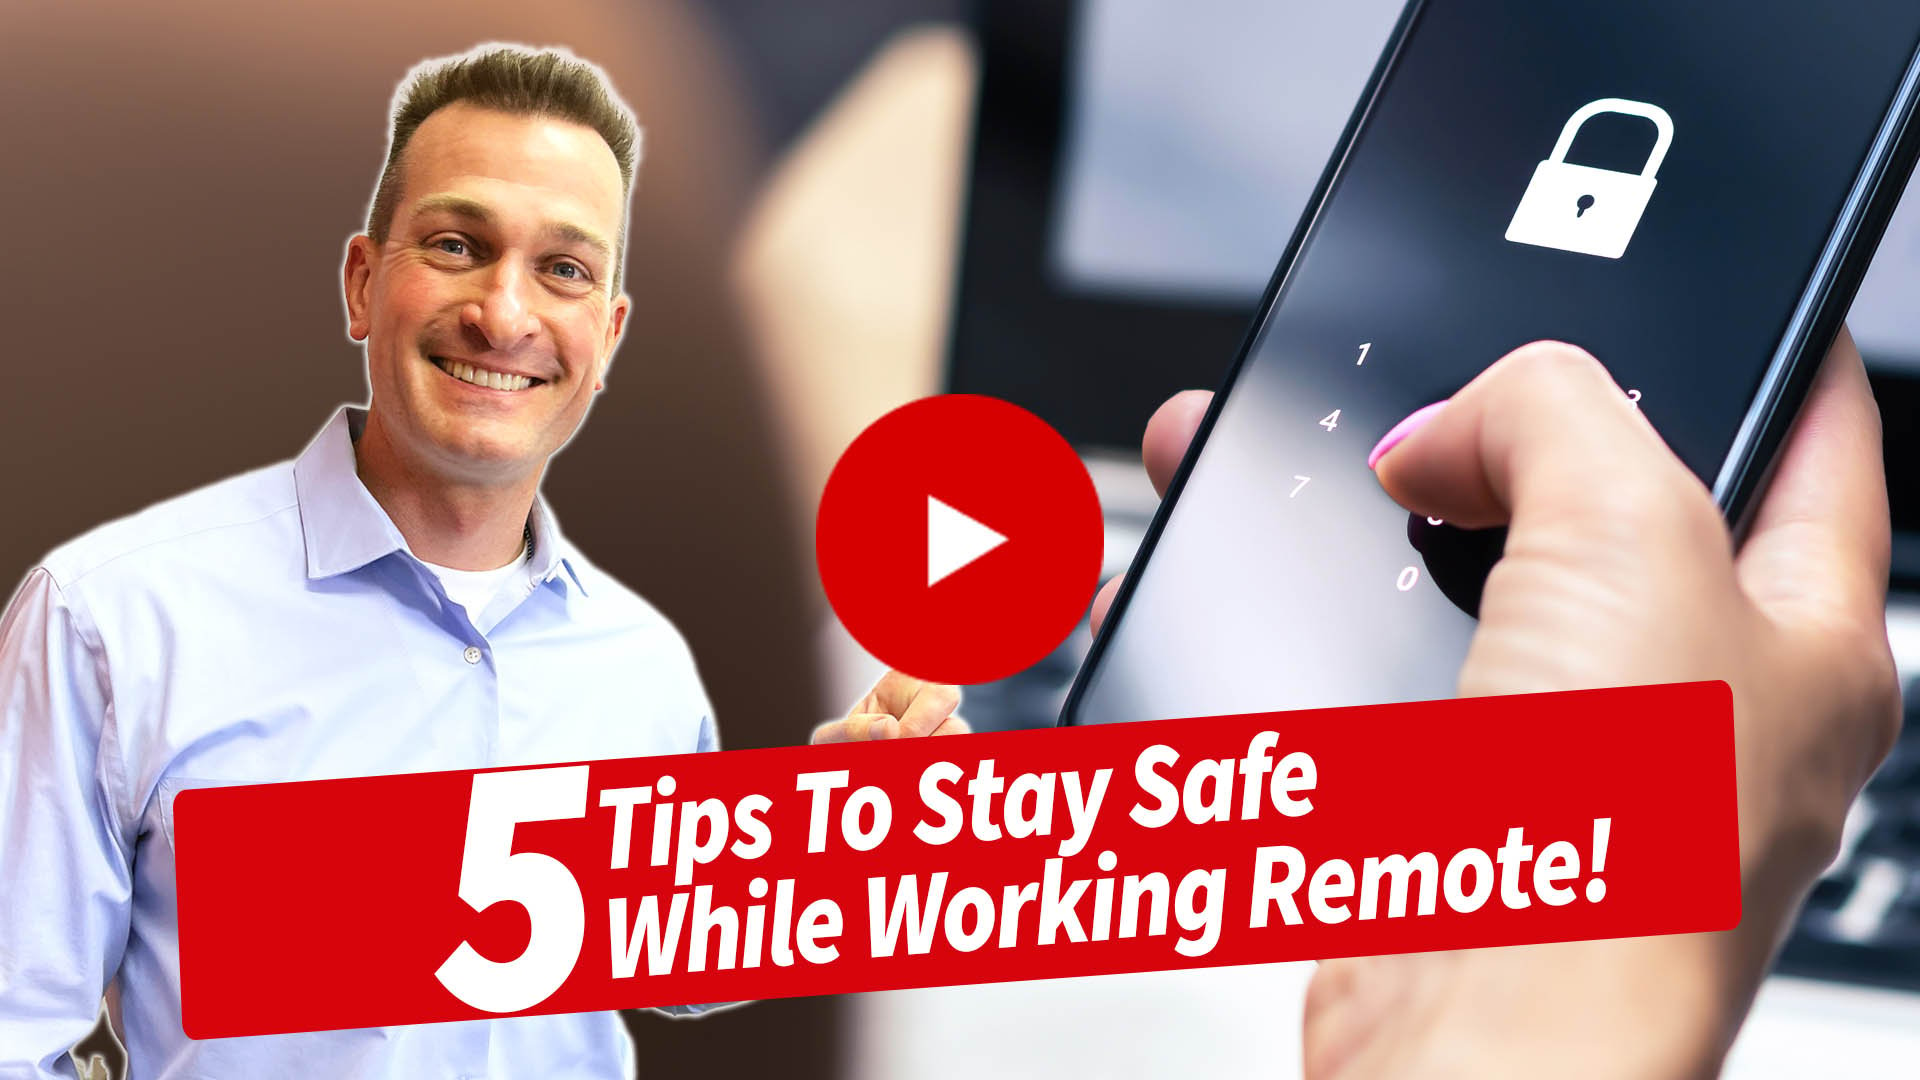 5 Tips To Stay Safe While Working Remote!